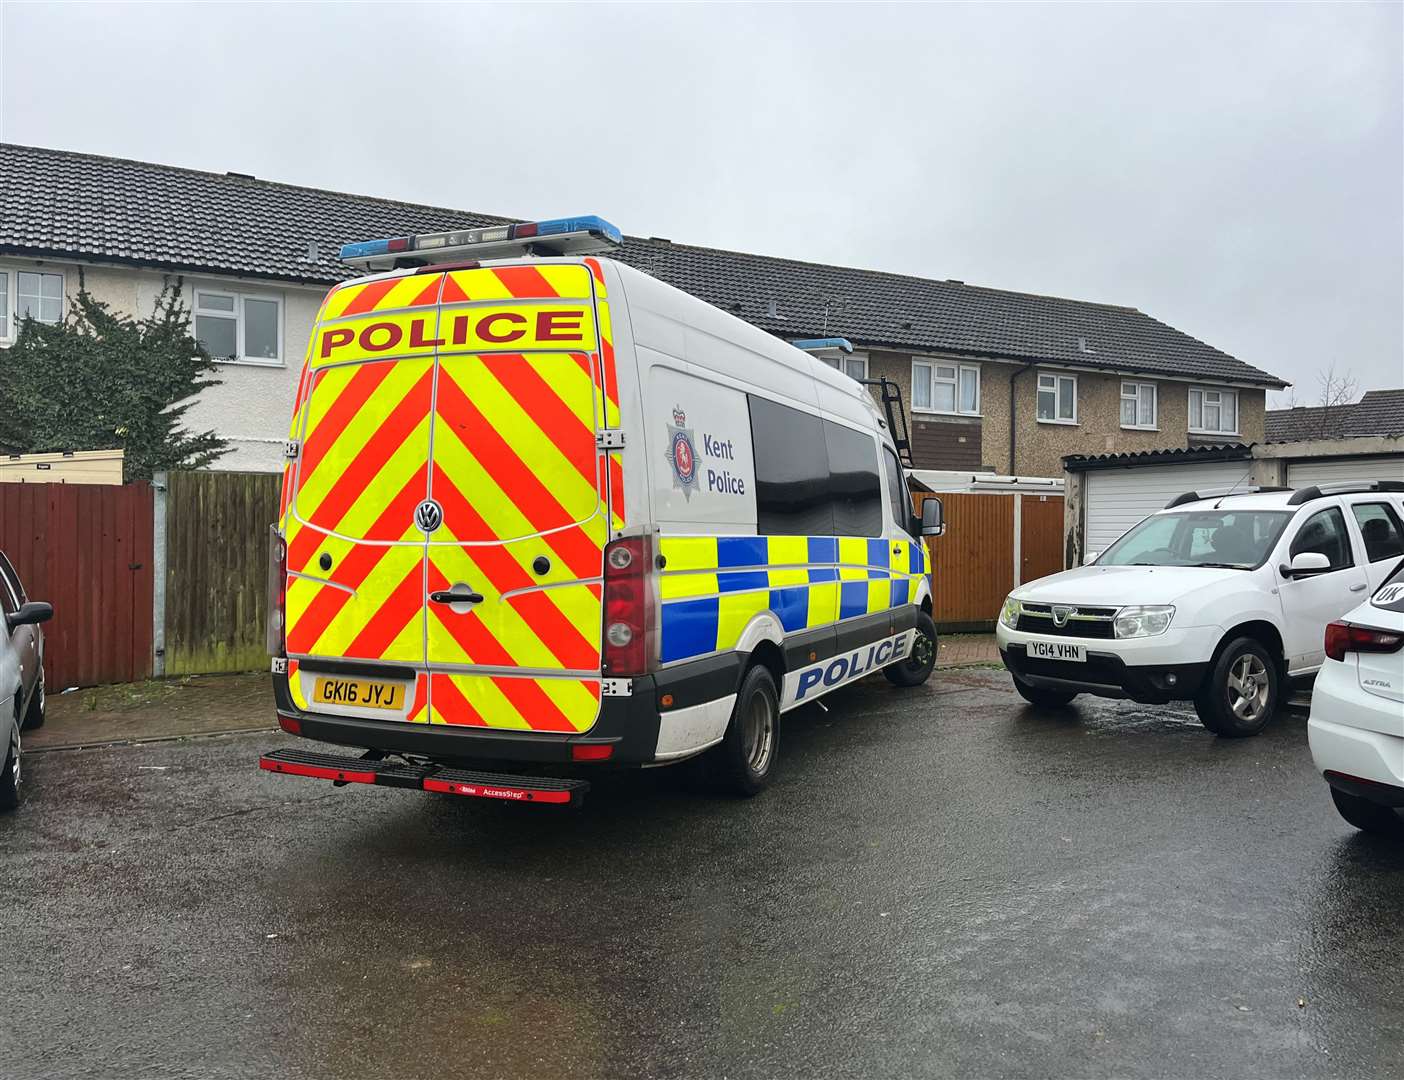 A police van parked in Stanhope yesterday afternoon